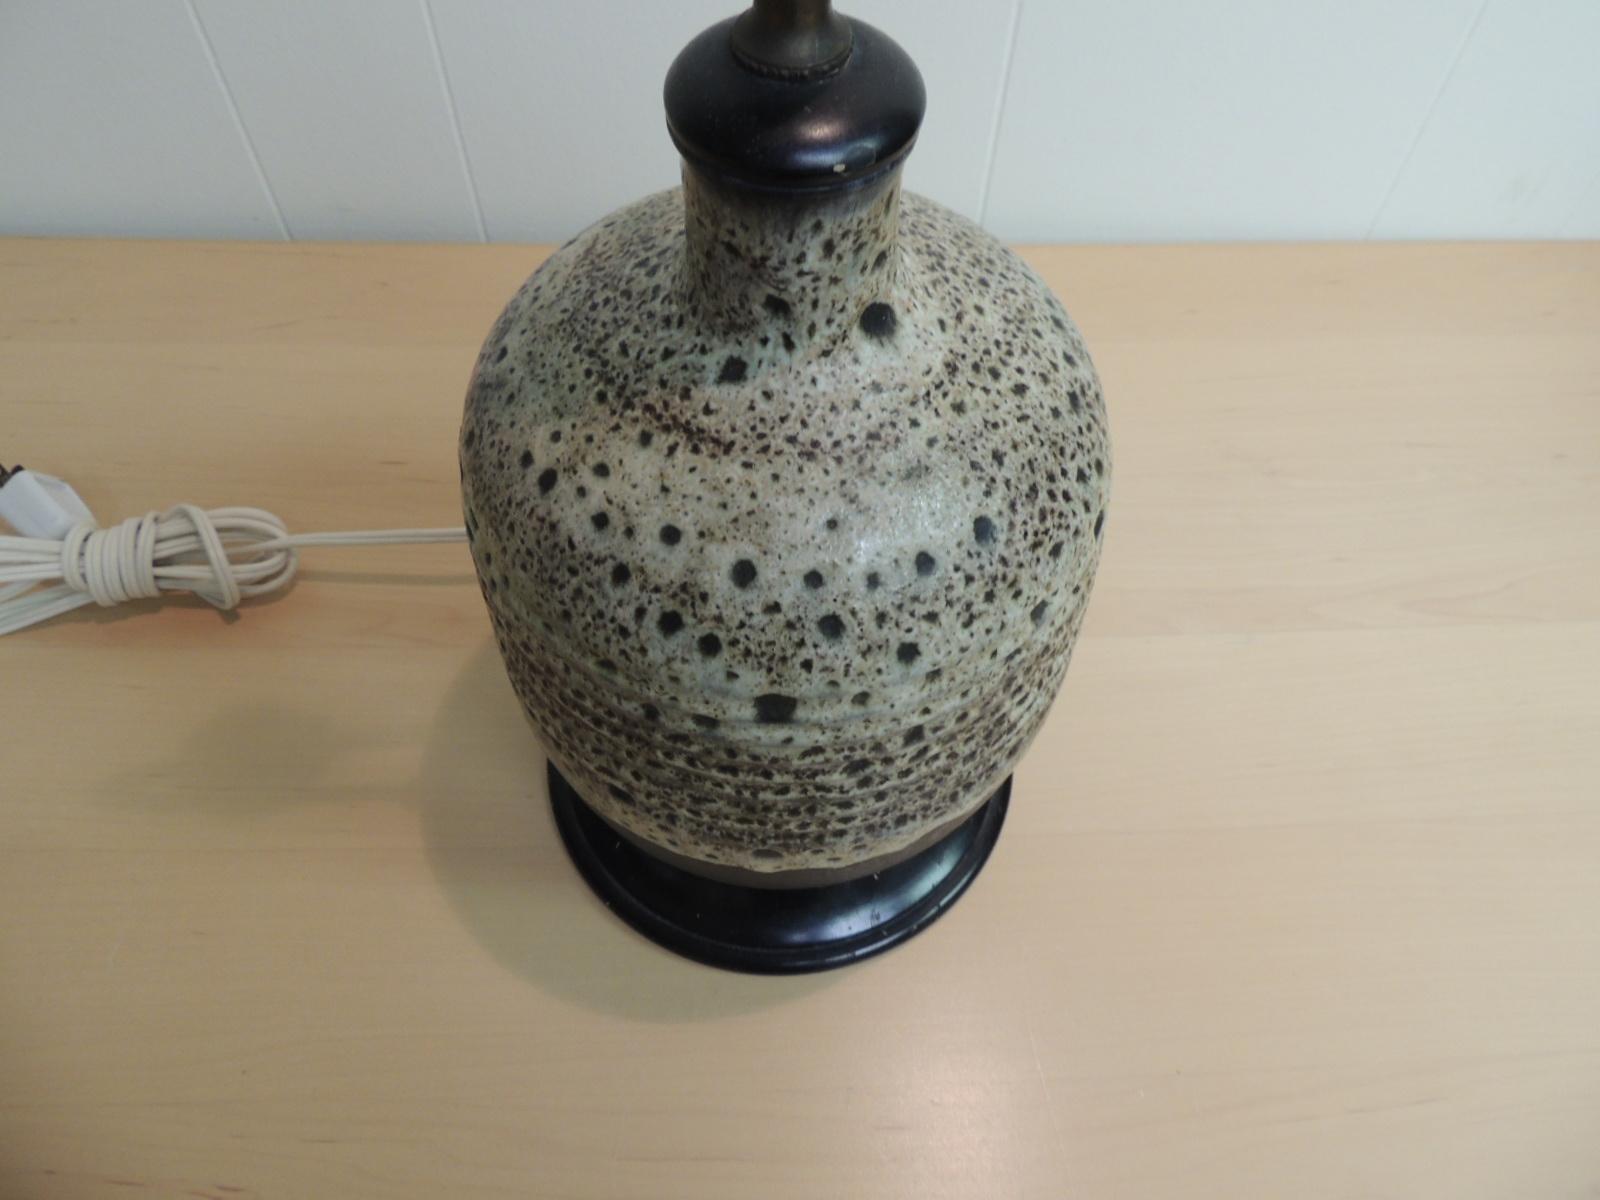 Mid-Century Modern art pottery ceramic table lamp. Round textured spotted ceramic lamp, mounted on wood base and wood topper in a dark mahogany finish. Brass fittings. Includes harp. No shade.
Newly re-wired and three way